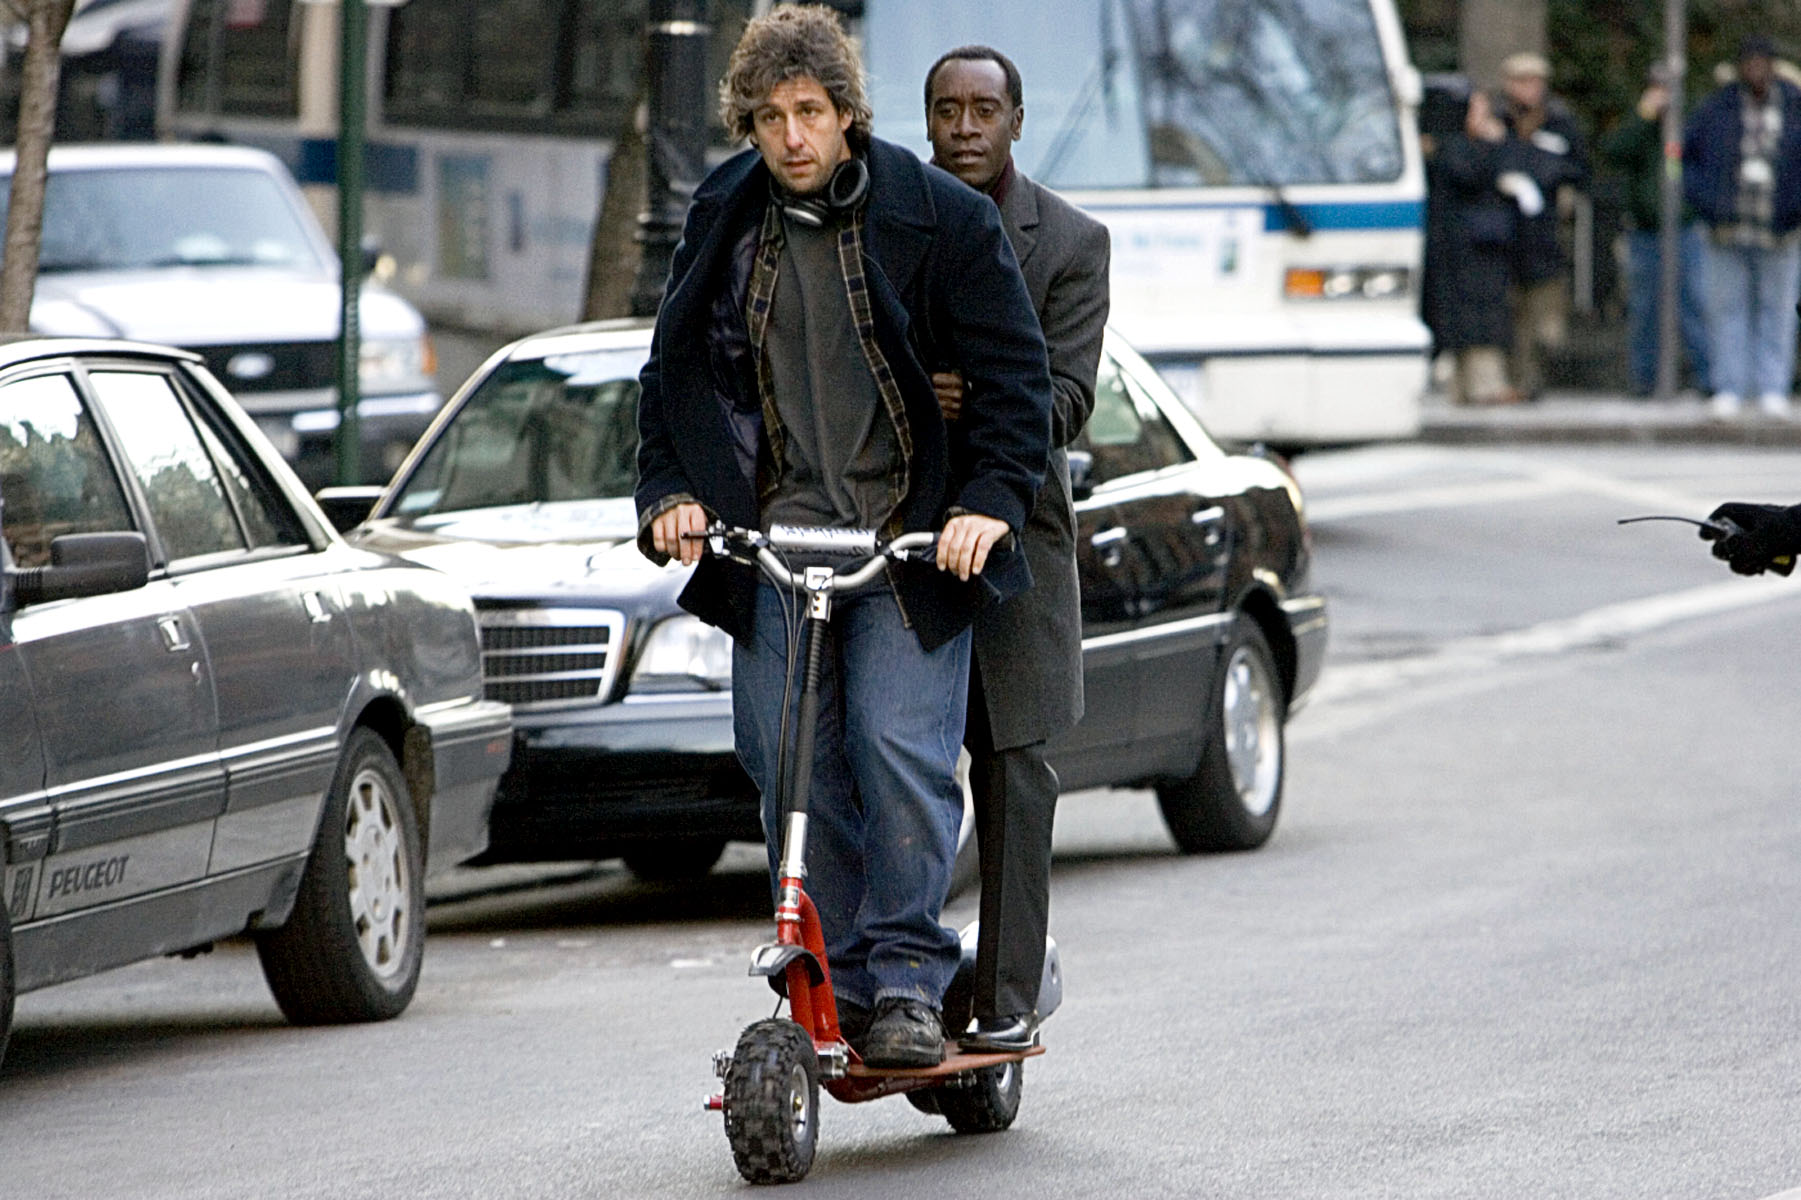 adam sandler and don cheadle on a scooter in nyc